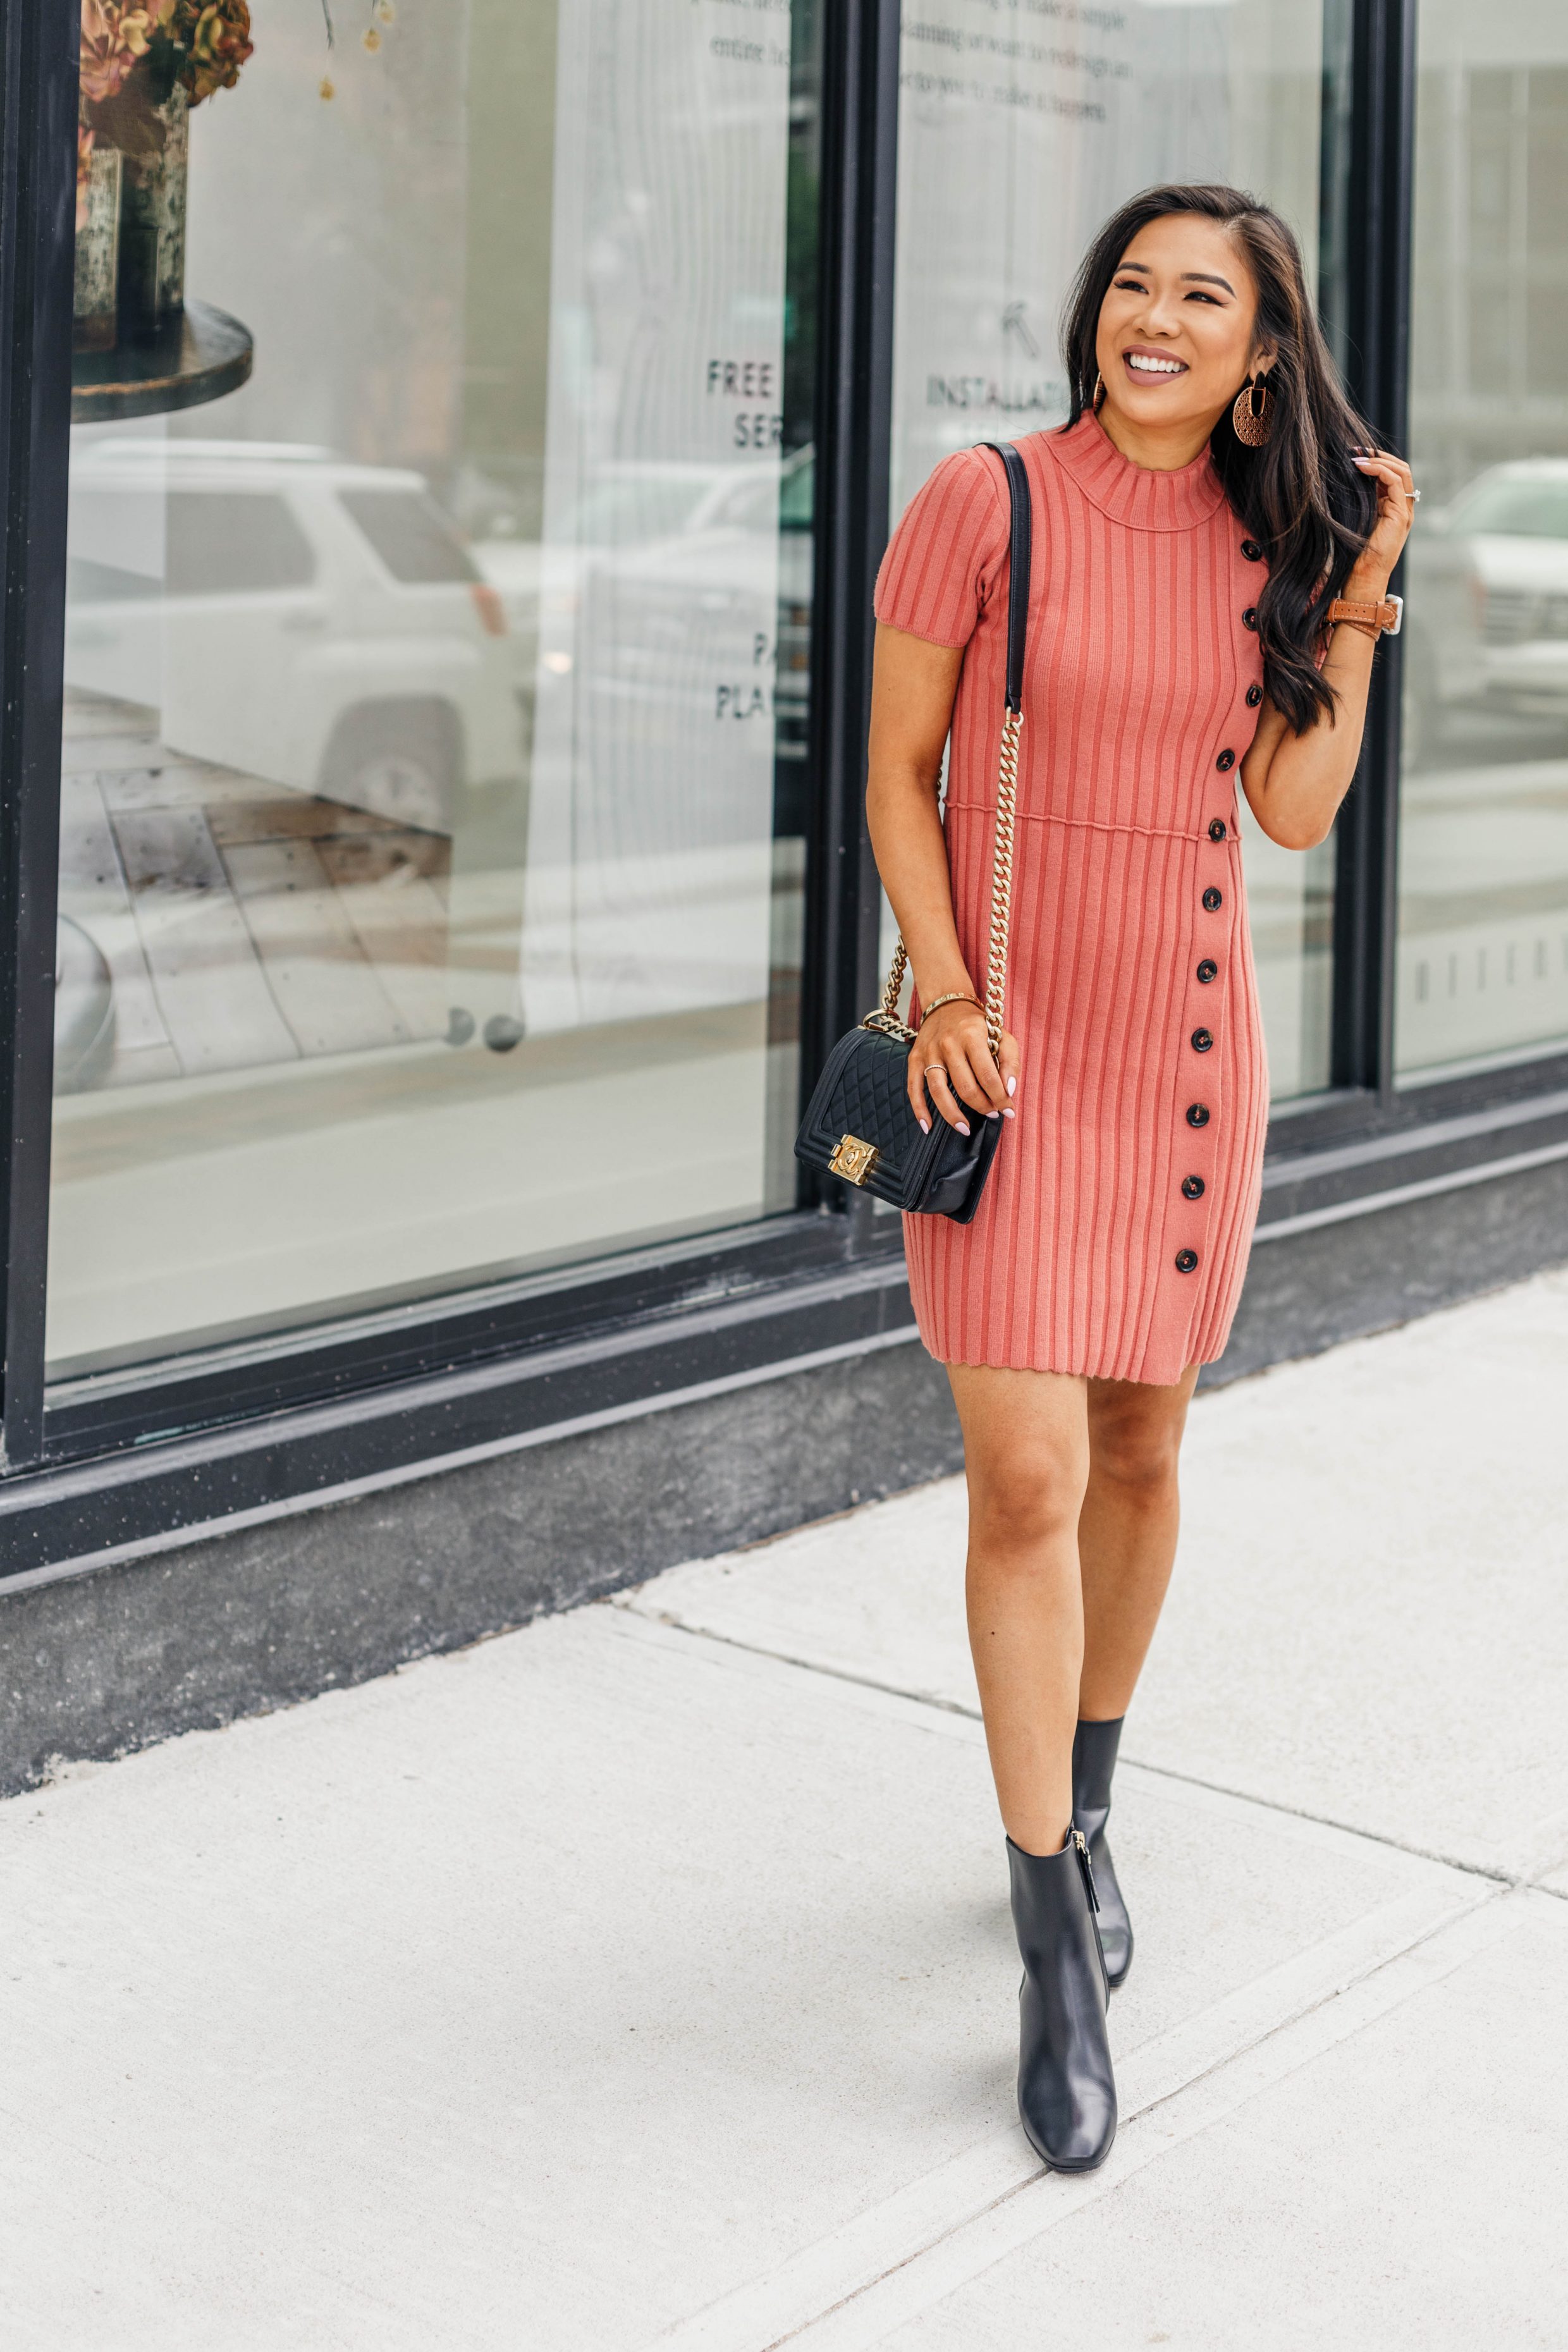 Blogger Hoang-Kim wears a free people dress with M. Gemi booties